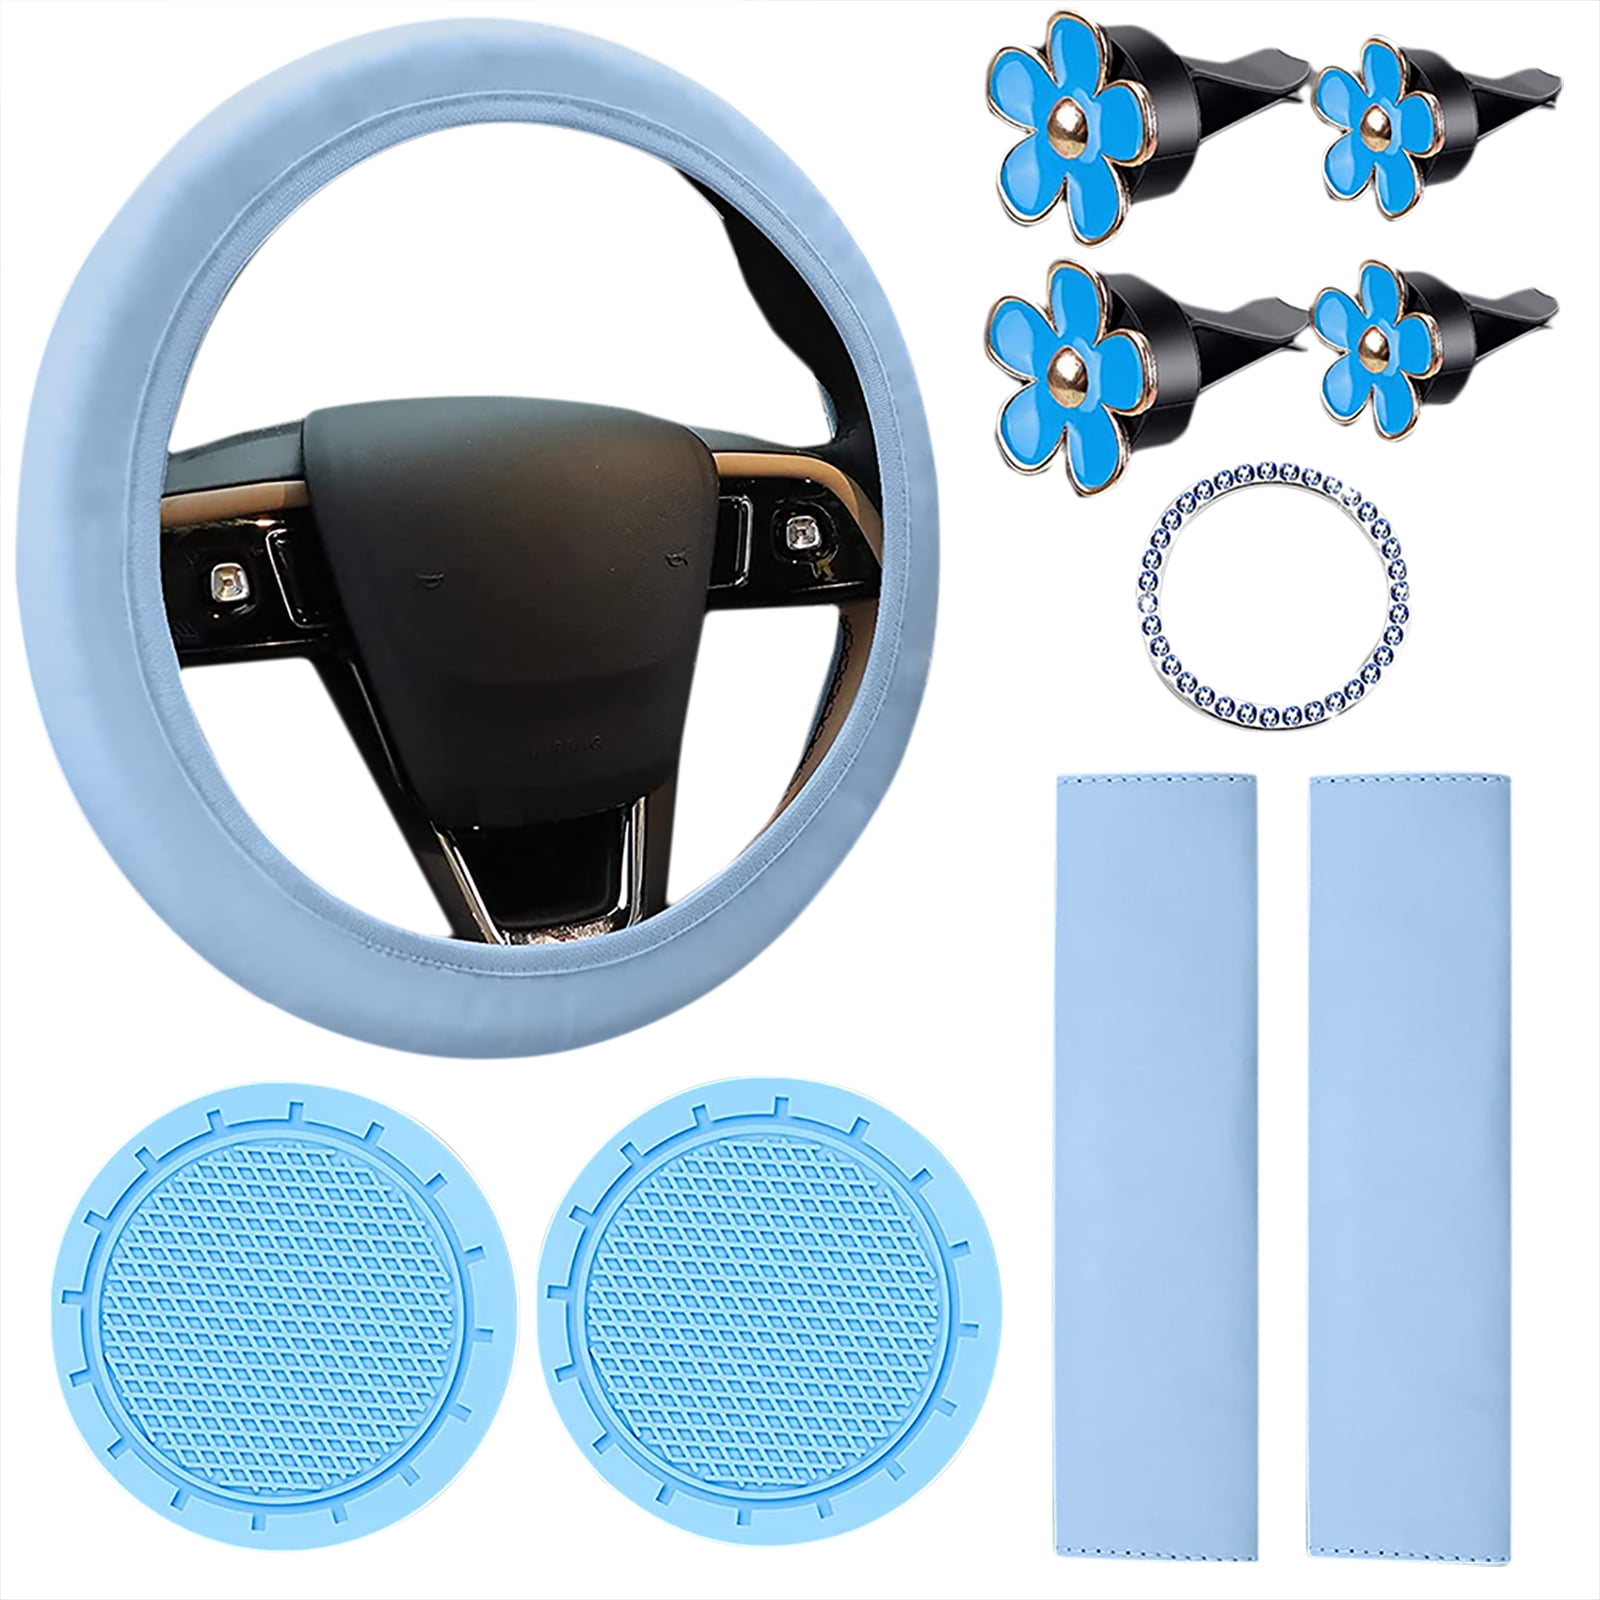 17 Pcs Bling Car Accessories Set for Women, Seat Covers Leather Steering  Wheel Cover, Seat Belt Shoulder Pad Armrest Cup Holders Covers, Full  Crystal